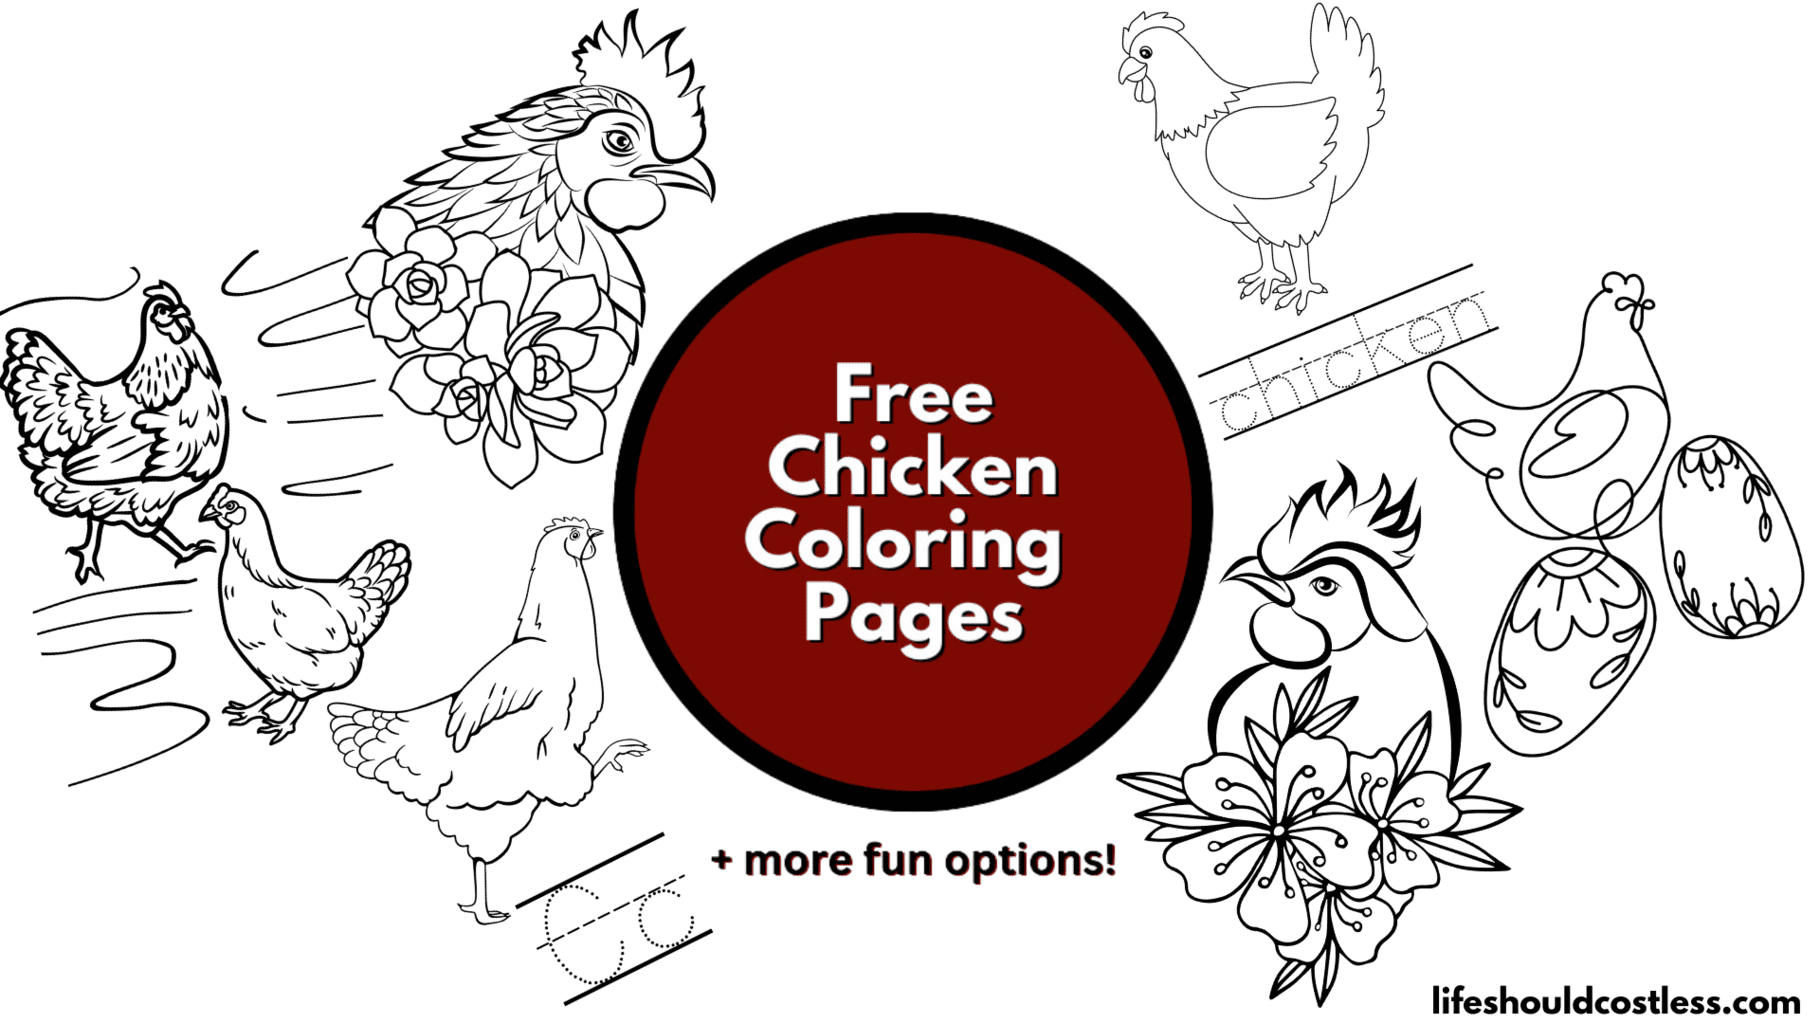 Chicken coloring pages free printable pdf templates